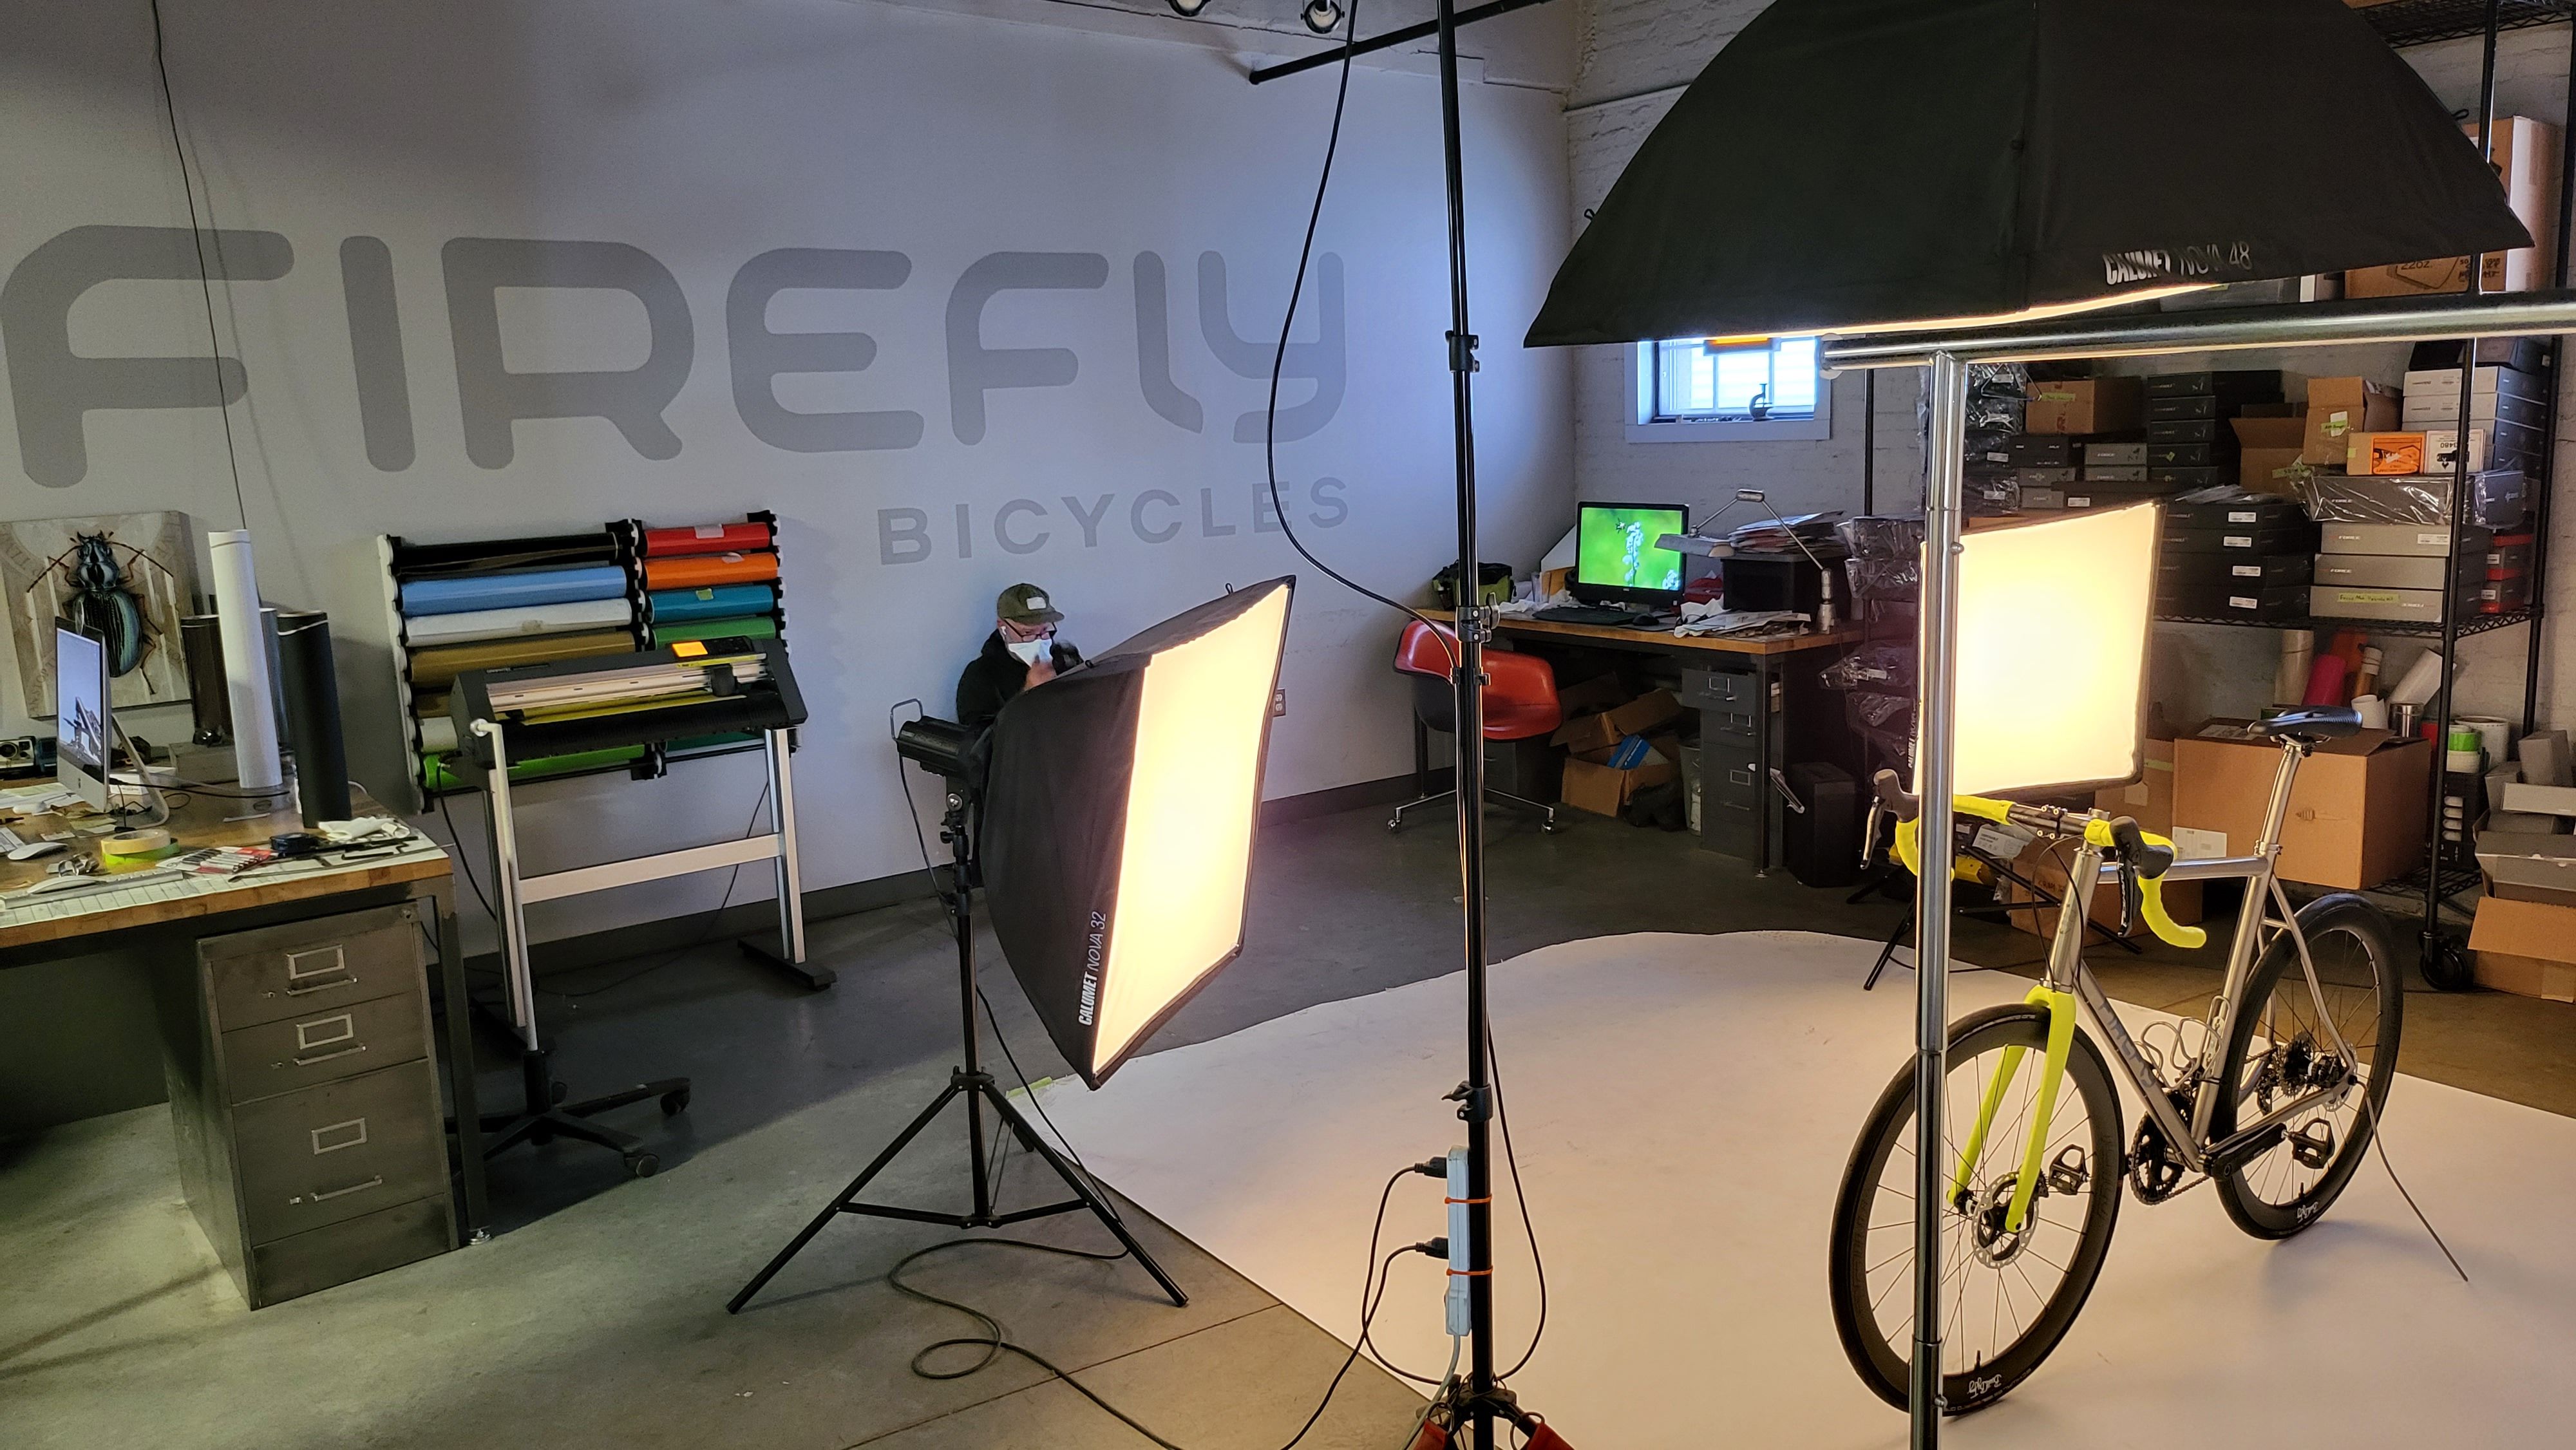 A bicycle in a photo studio.